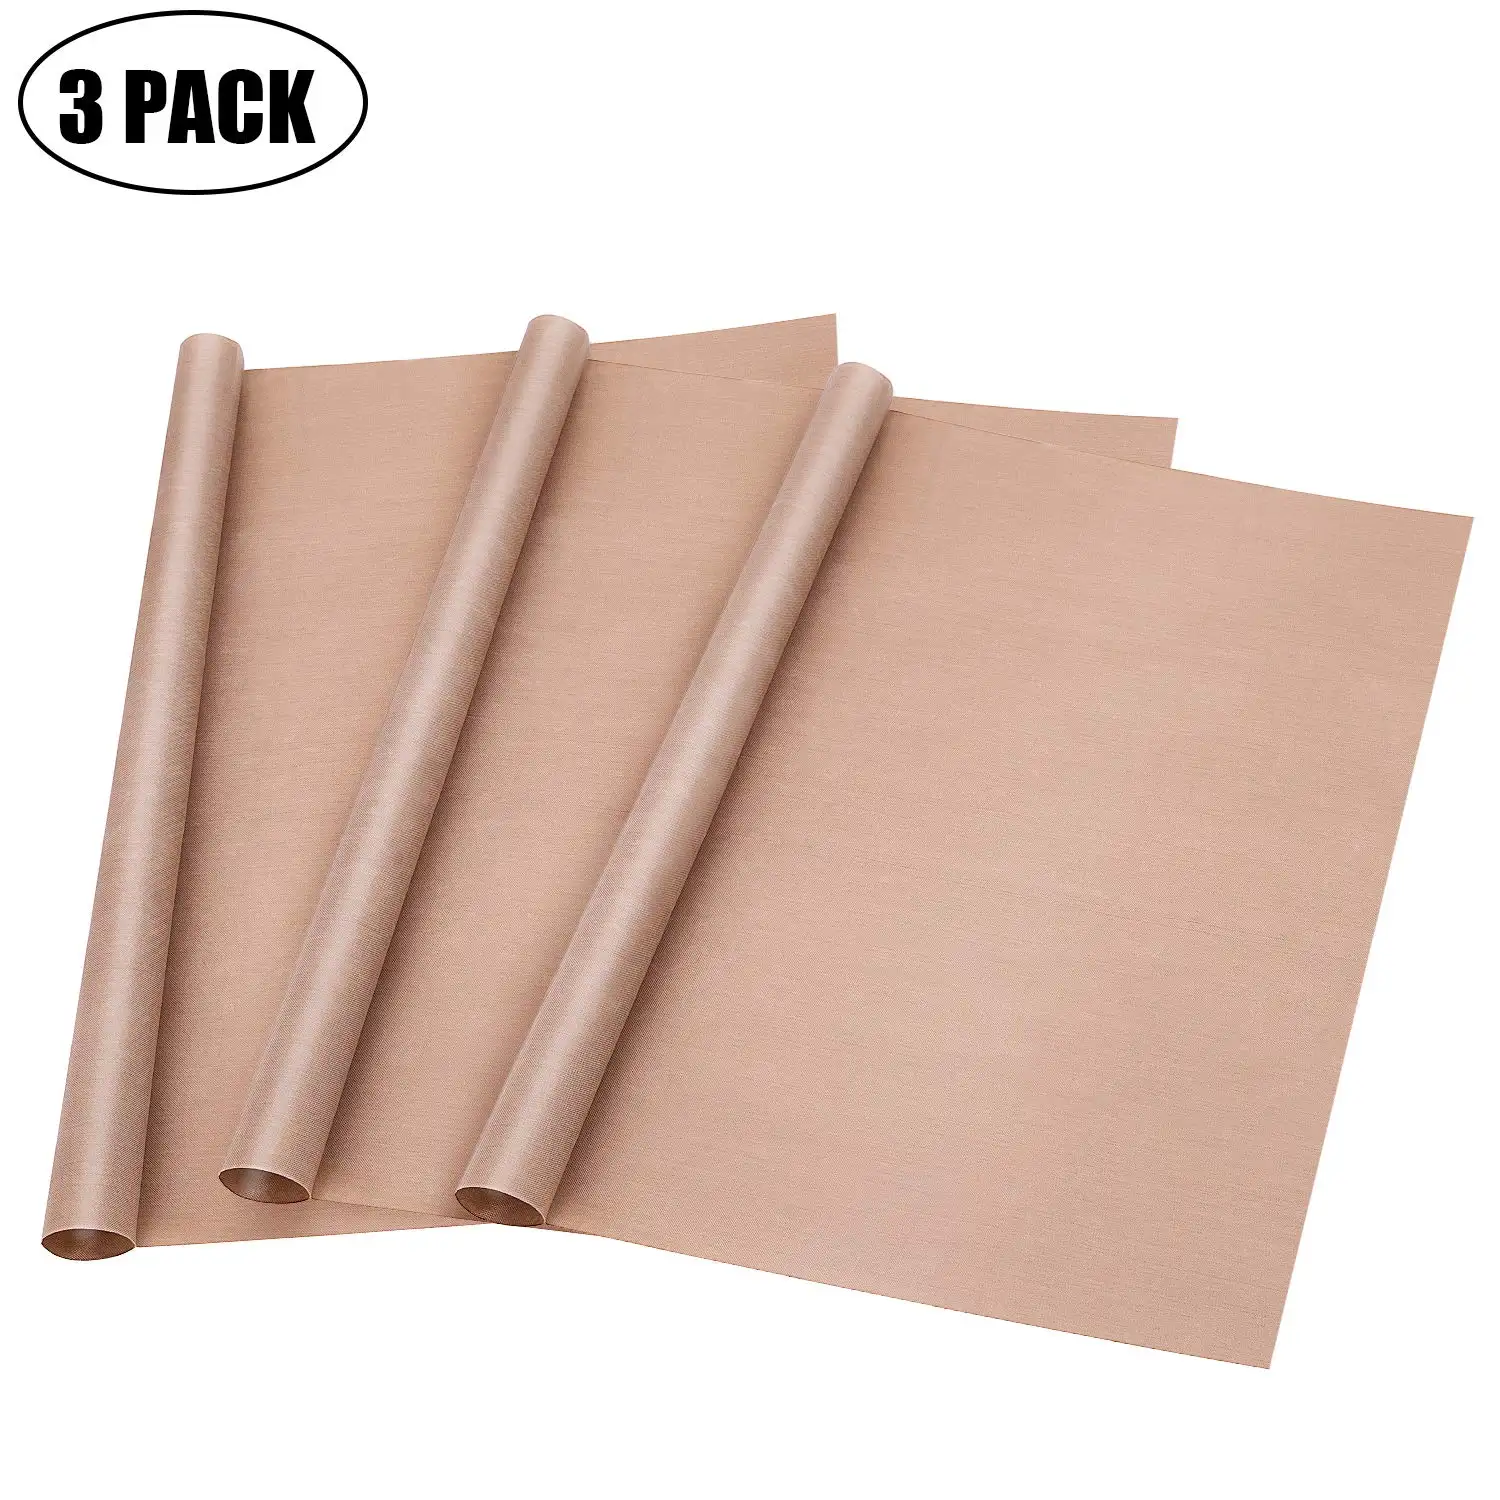 Reusable 3 pack heat resistant 16x20 inch PTFE sheet for heat press machines ironing 1000 uses